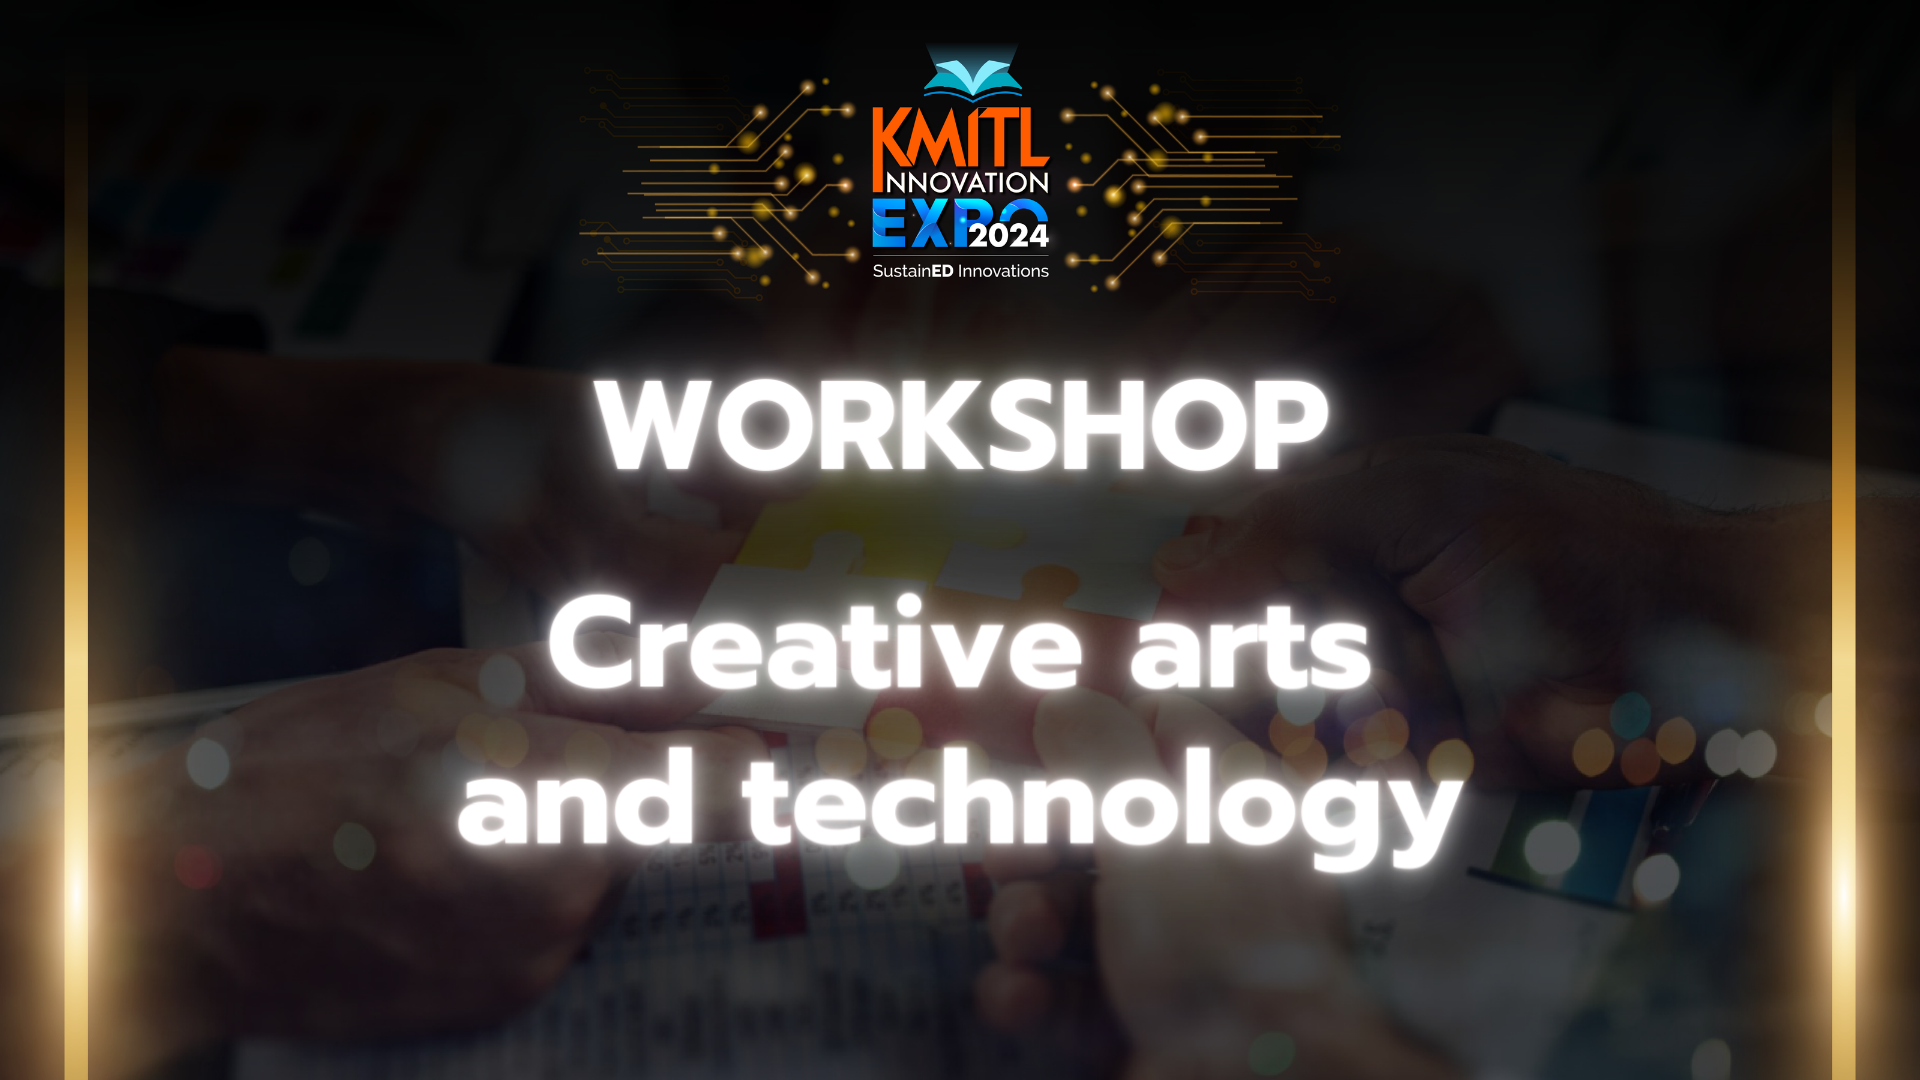 Workshop Creative arts and technology